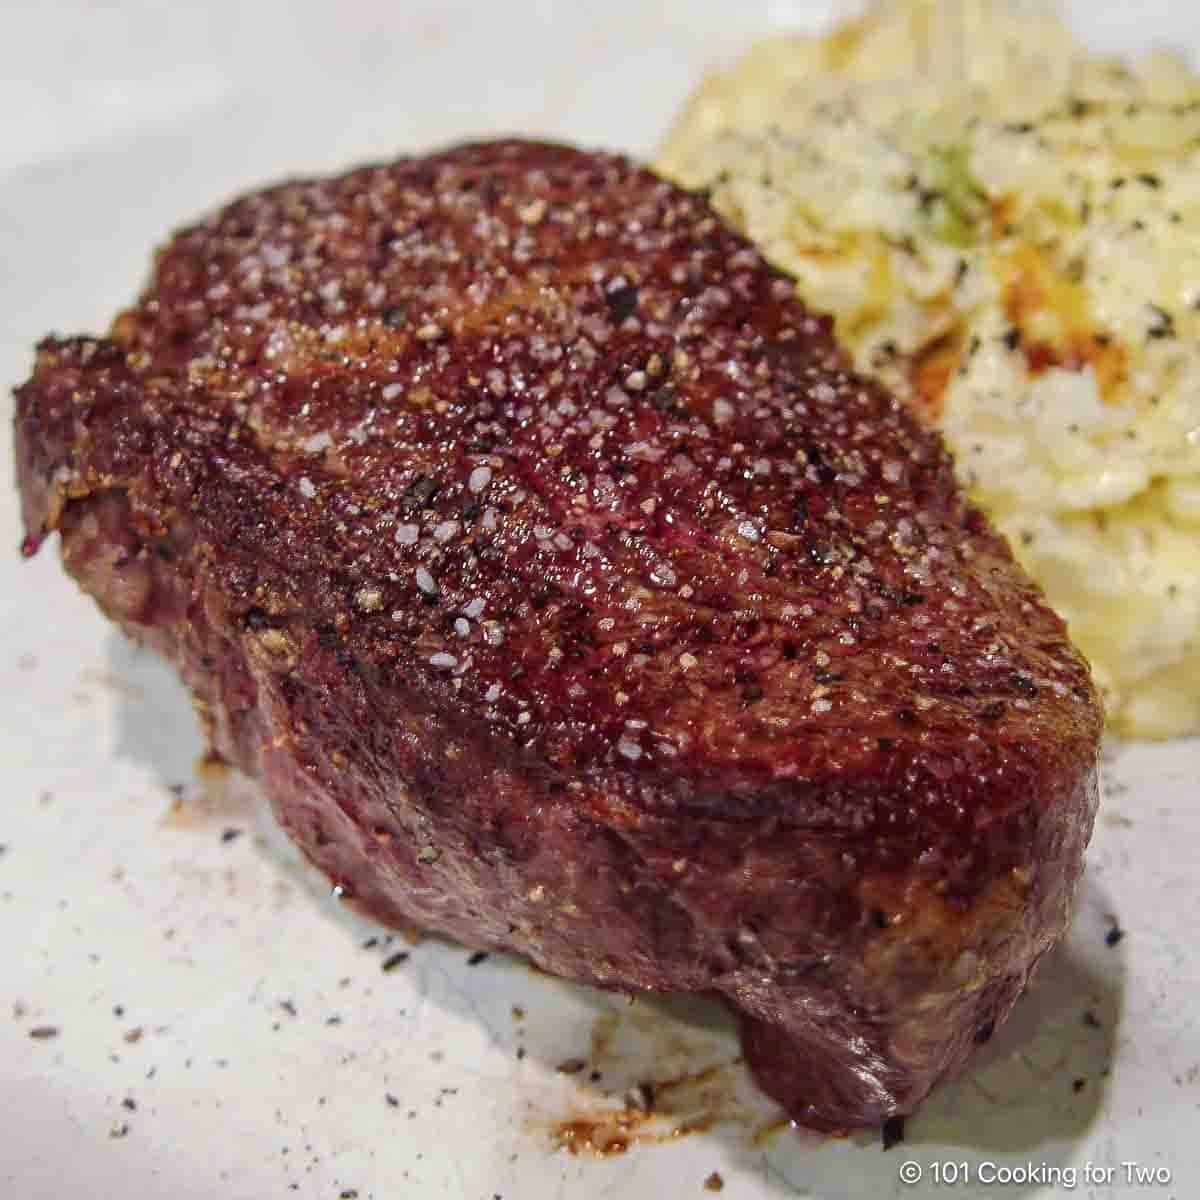 How To Cook Whole Filet Mignon In The Oven - Phaseisland17